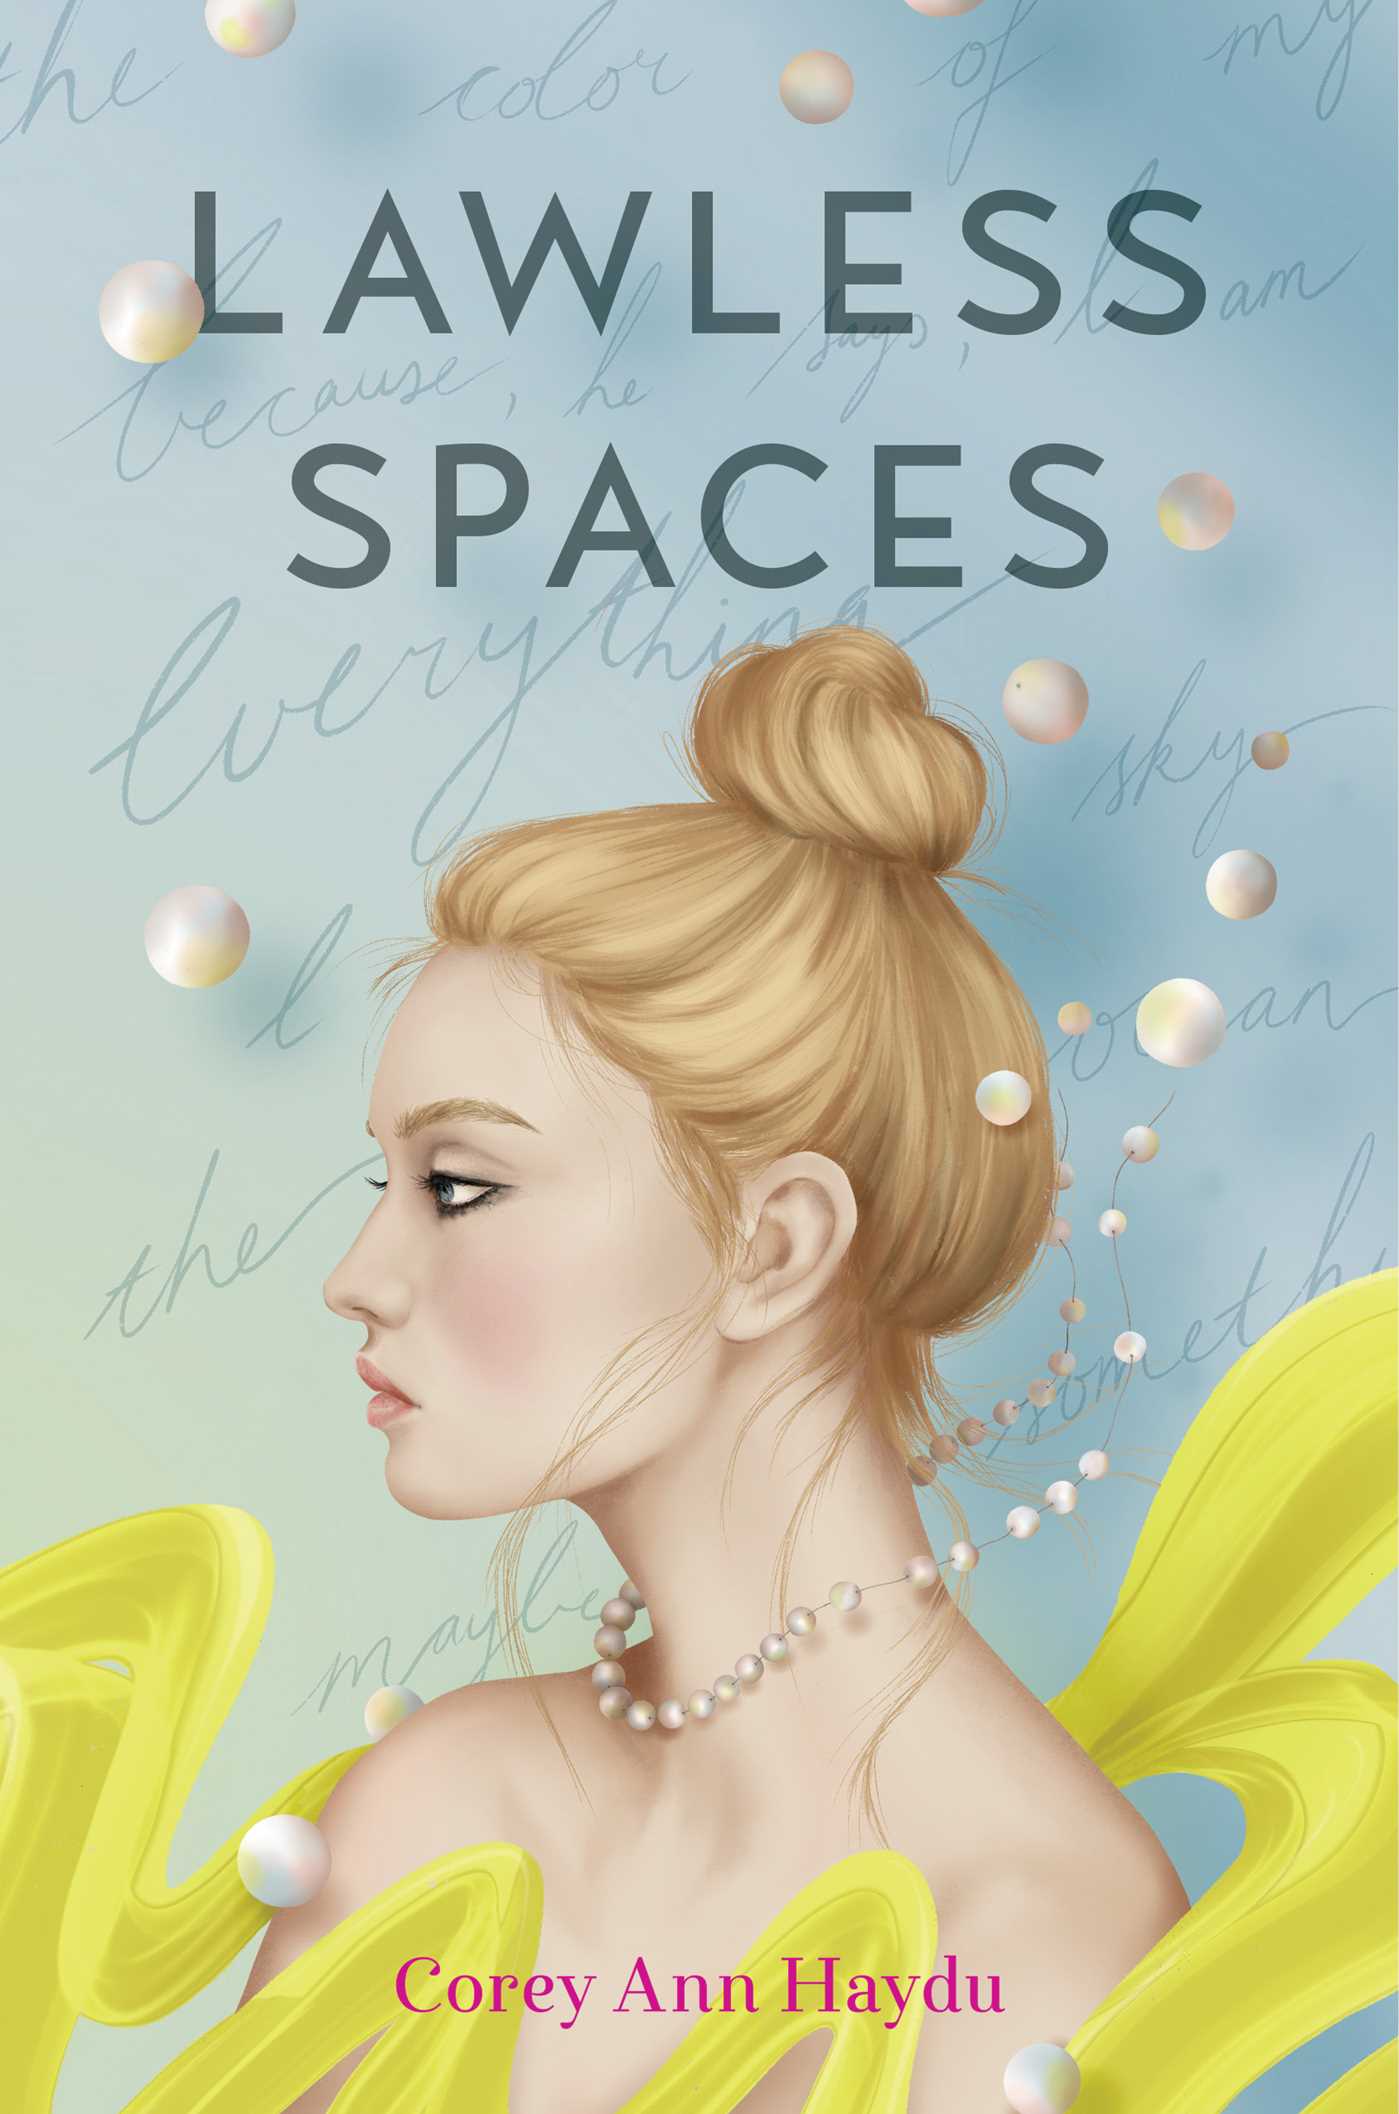 lawless spaces book cover